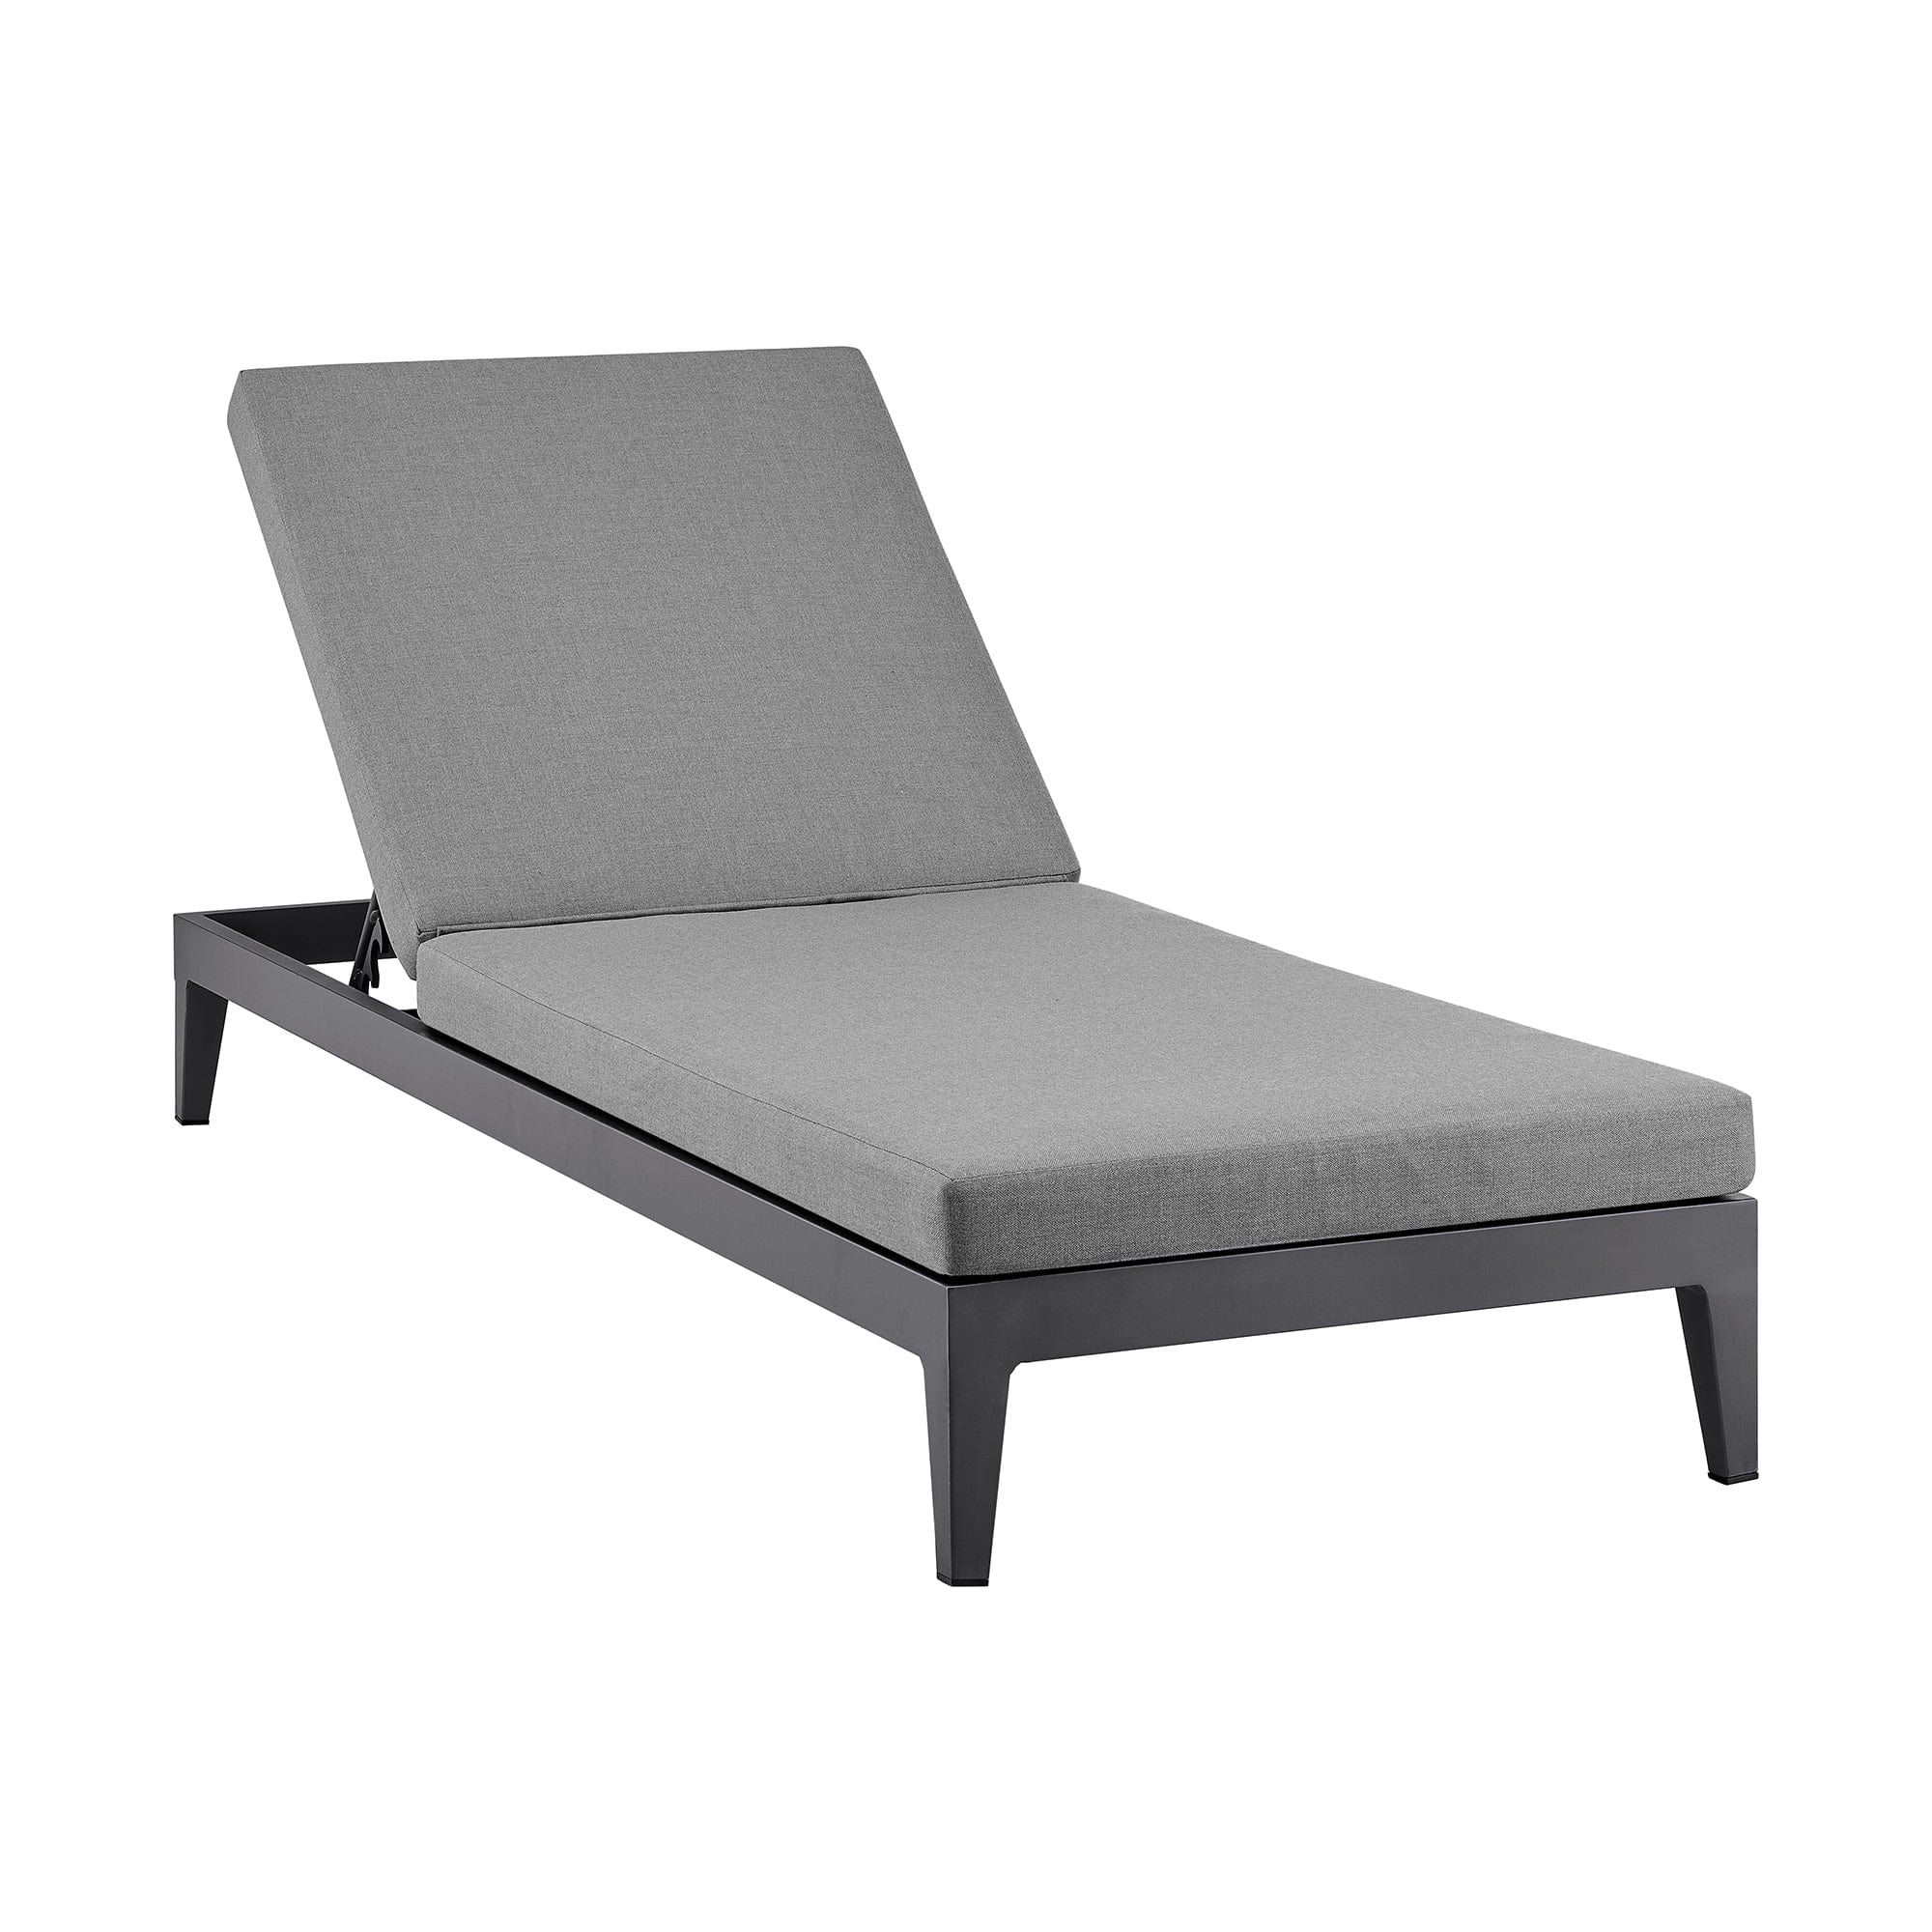 Armen Living Outdoor Chaise Lounge Armen Living | Menorca Outdoor Patio Adjustable Chaise Lounge Chair in Aluminum with Grey Cushions | LCMQLOGR